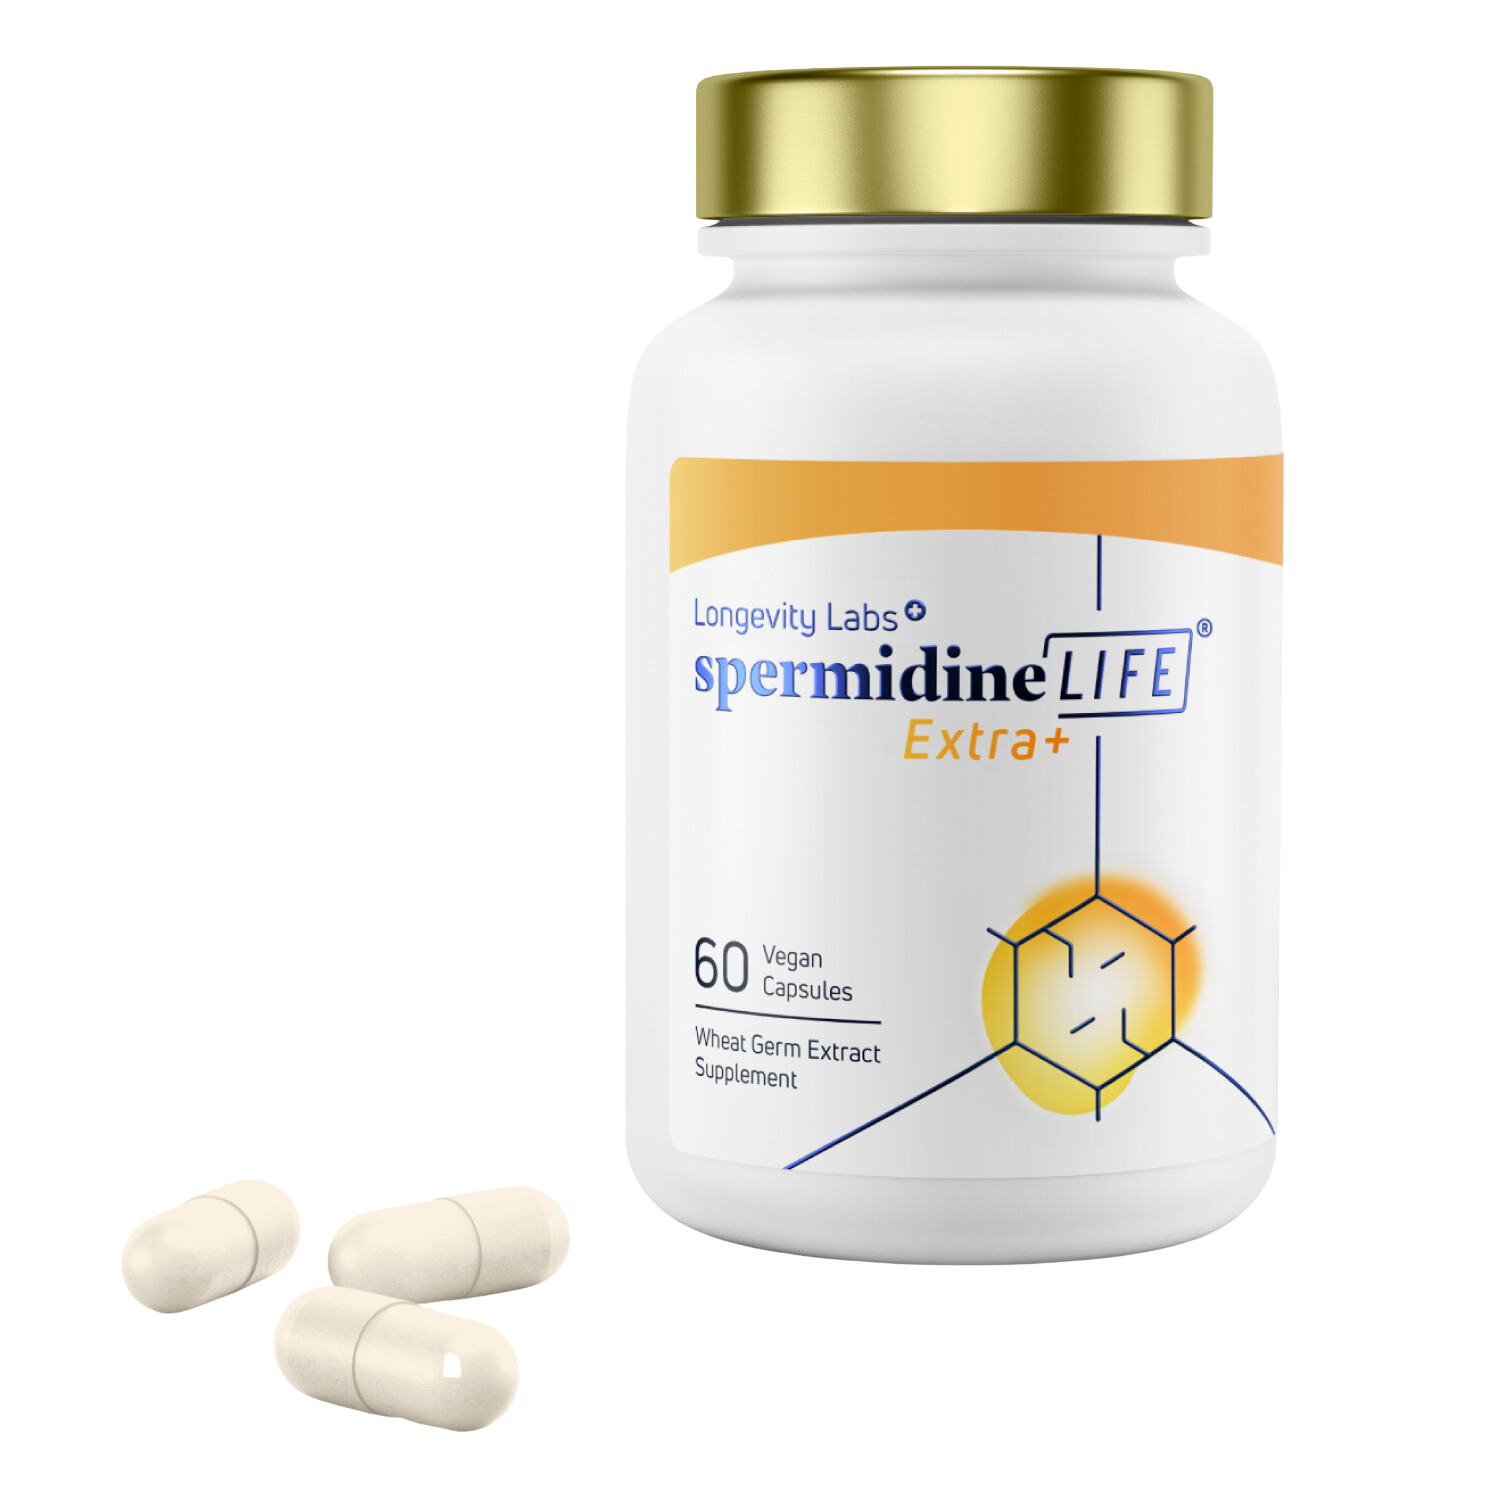 Bottle of spermidineLIFE® Extra + Pro Bundle supplement by Longevity Labs, Inc with two capsules displayed in front.